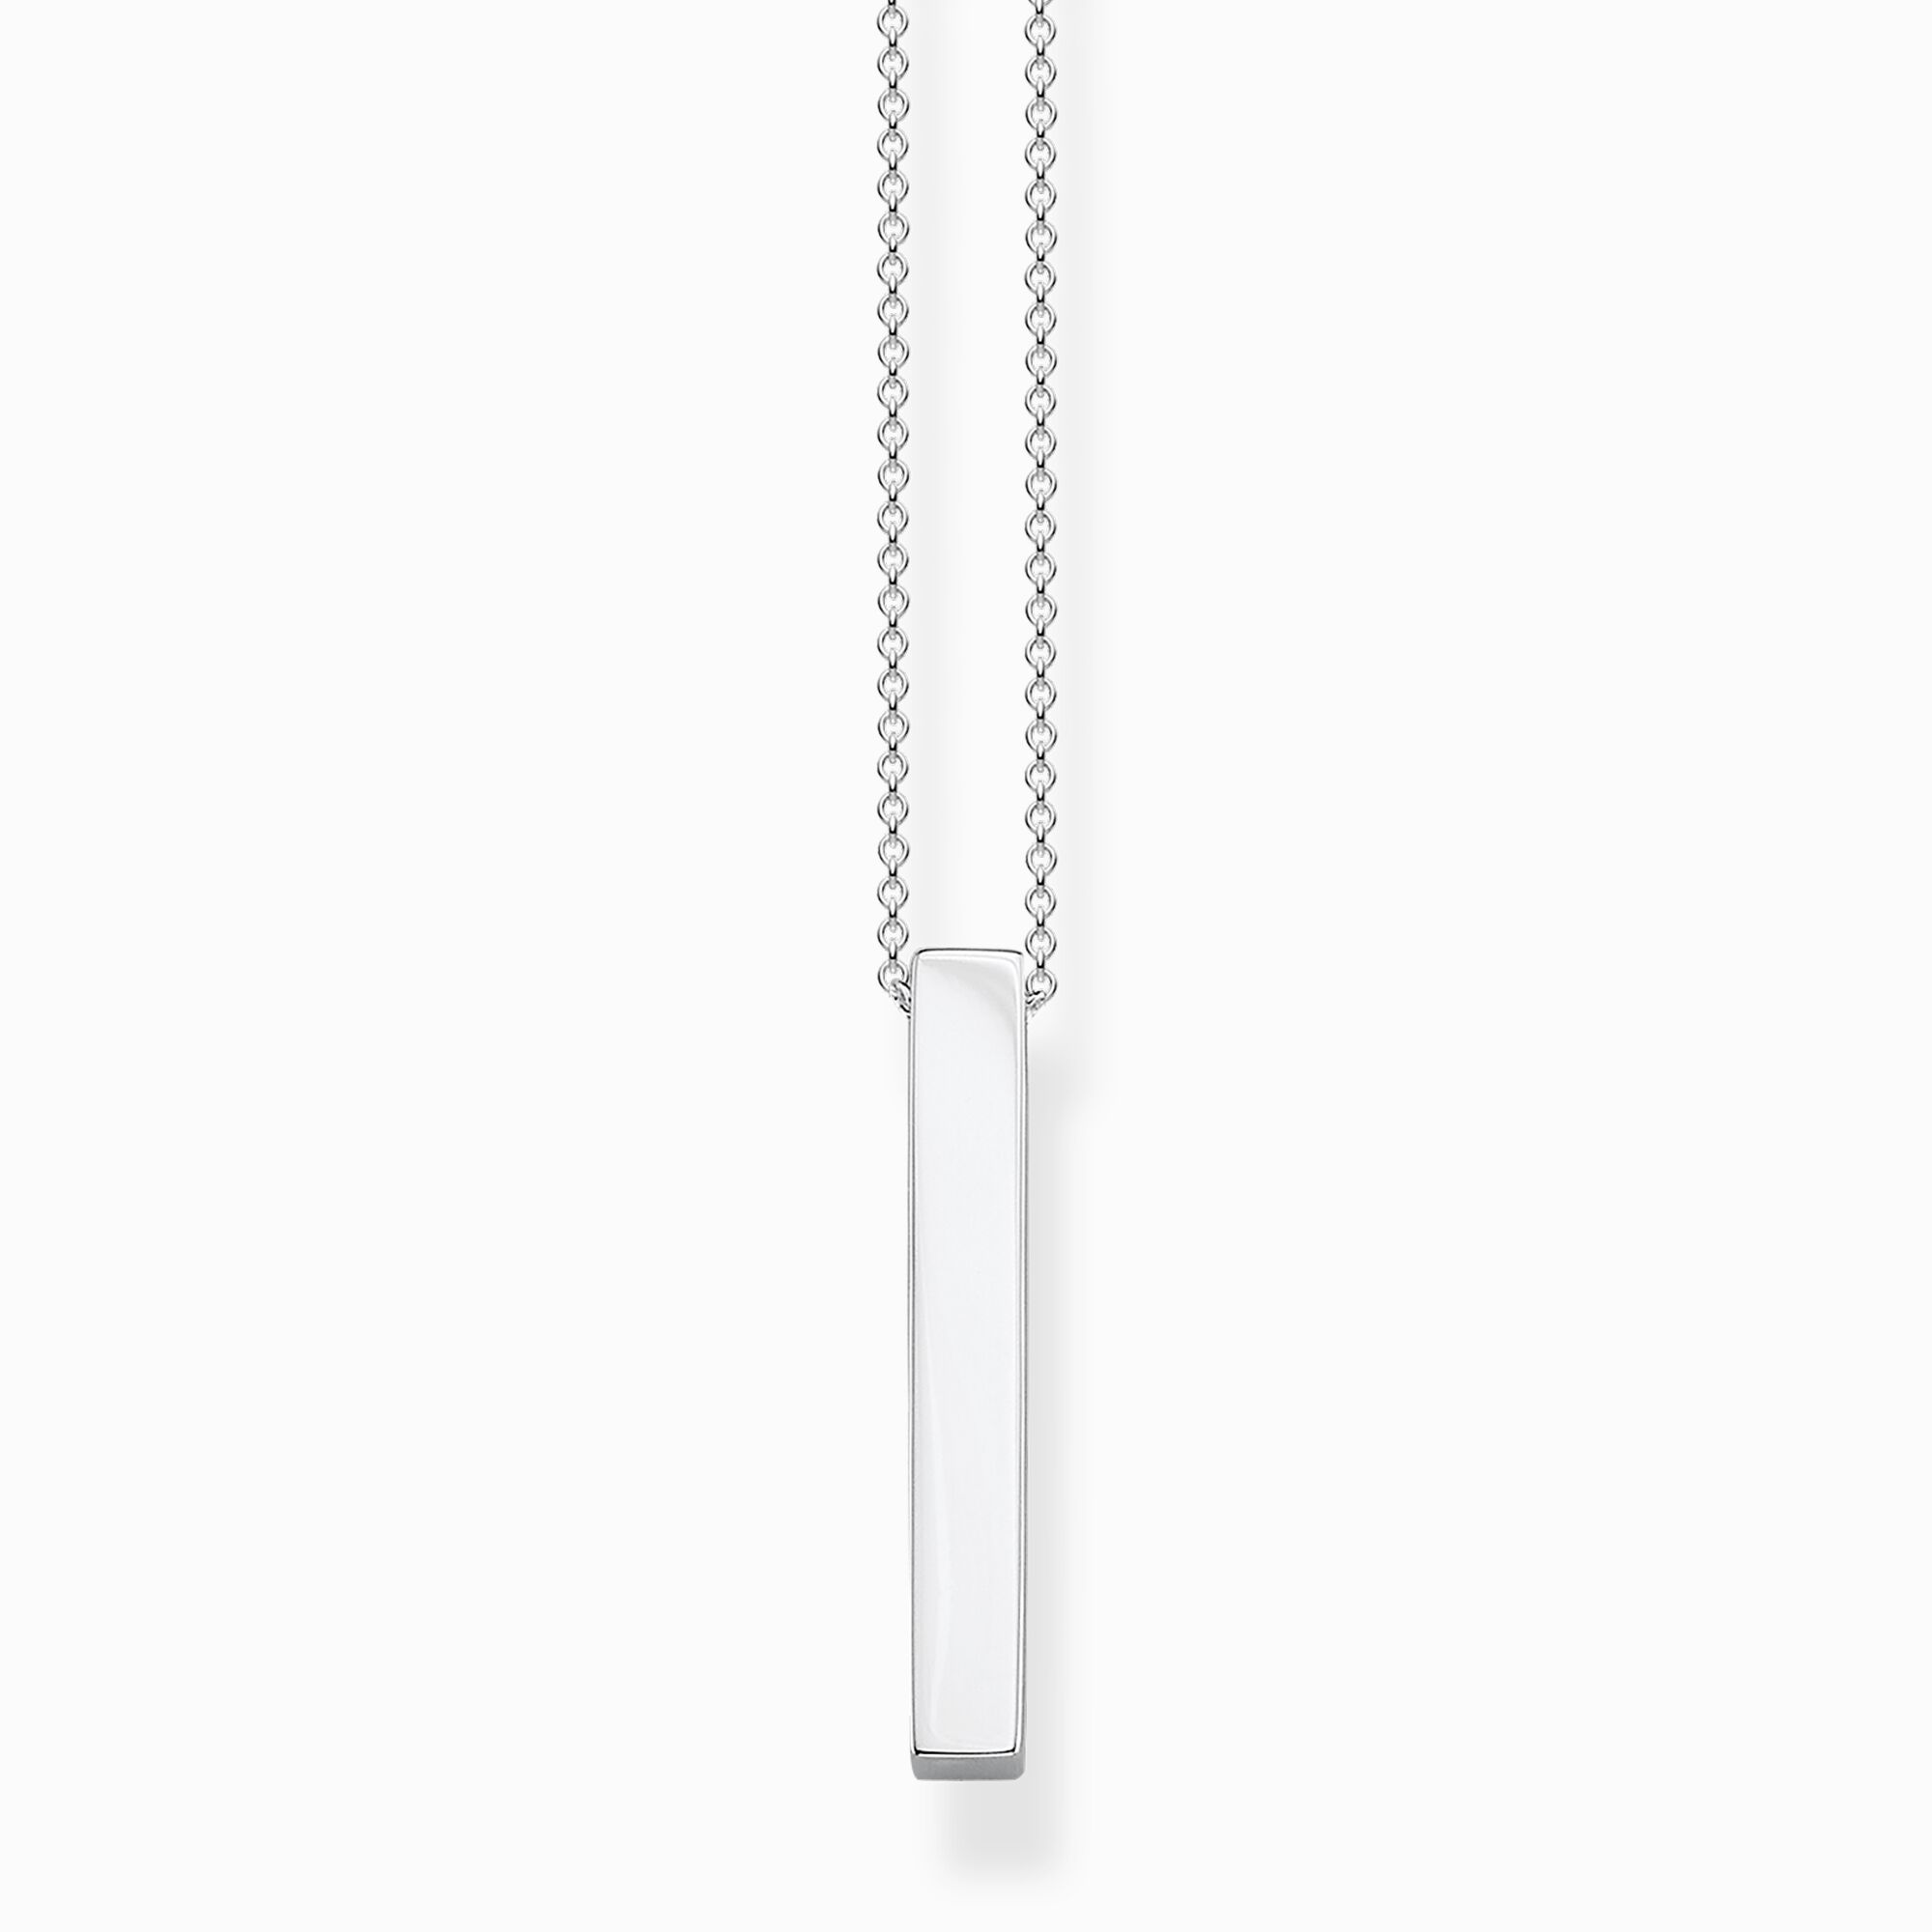 Necklace silver cuboid from the  collection in the THOMAS SABO online store